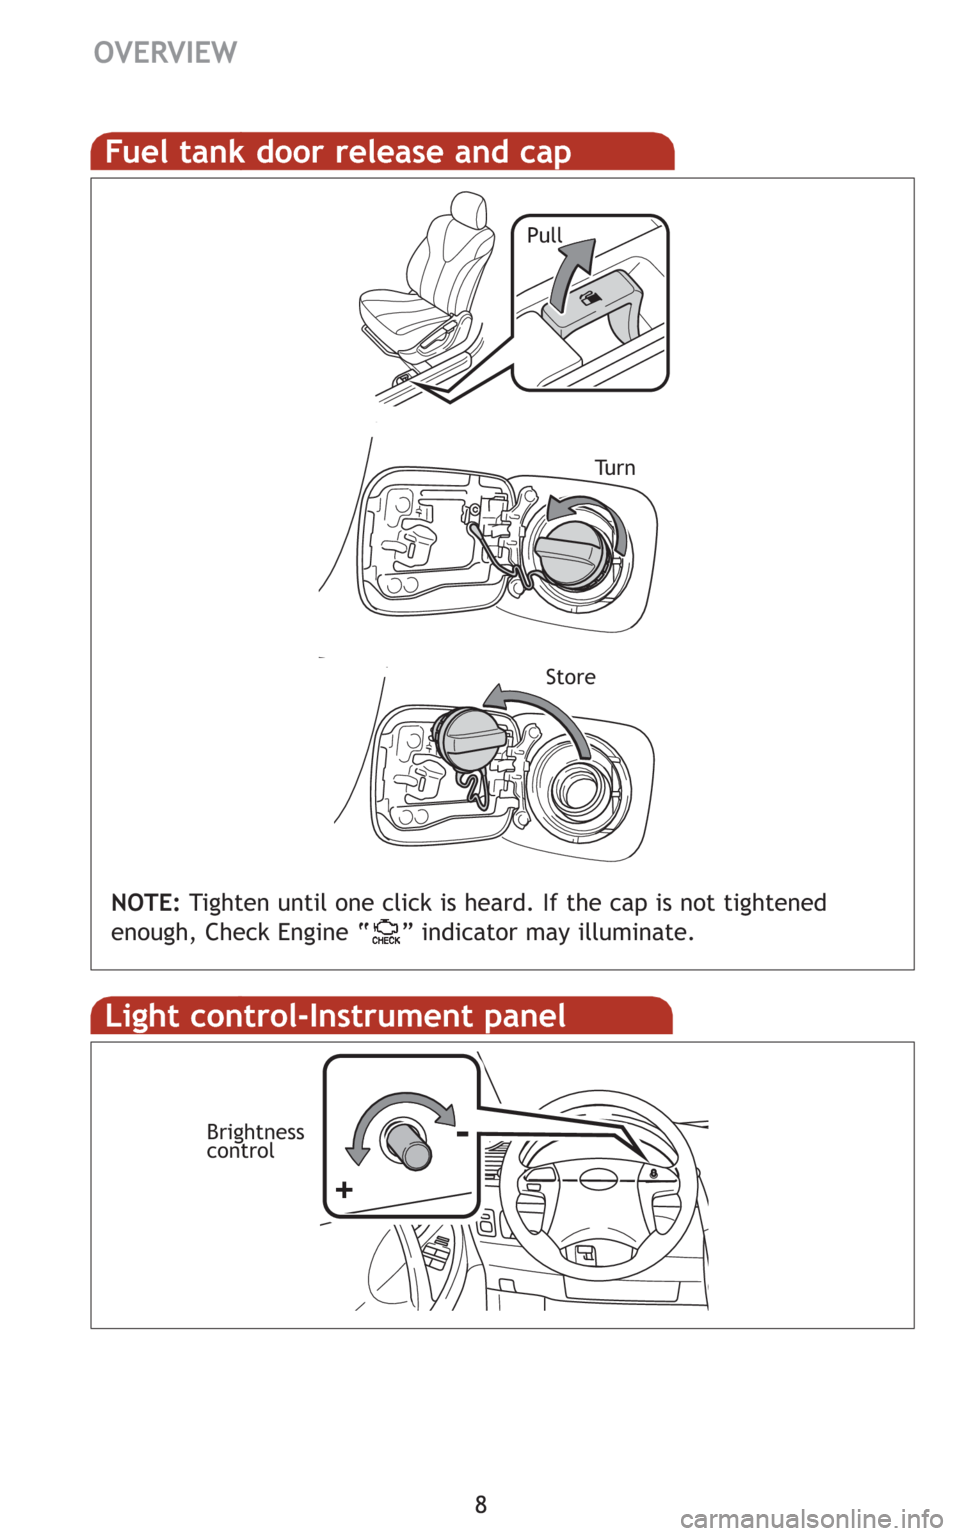 TOYOTA CAMRY 2008 XV40 / 8.G Quick Reference Guide 8
Fuel tank door release and cap
NOTE:Tighten until one click is heard. If the cap is not tightened
enough, Check Engine “    ” indicator may illuminate.
Pull
Tu r n
Store
Light control-Instrument